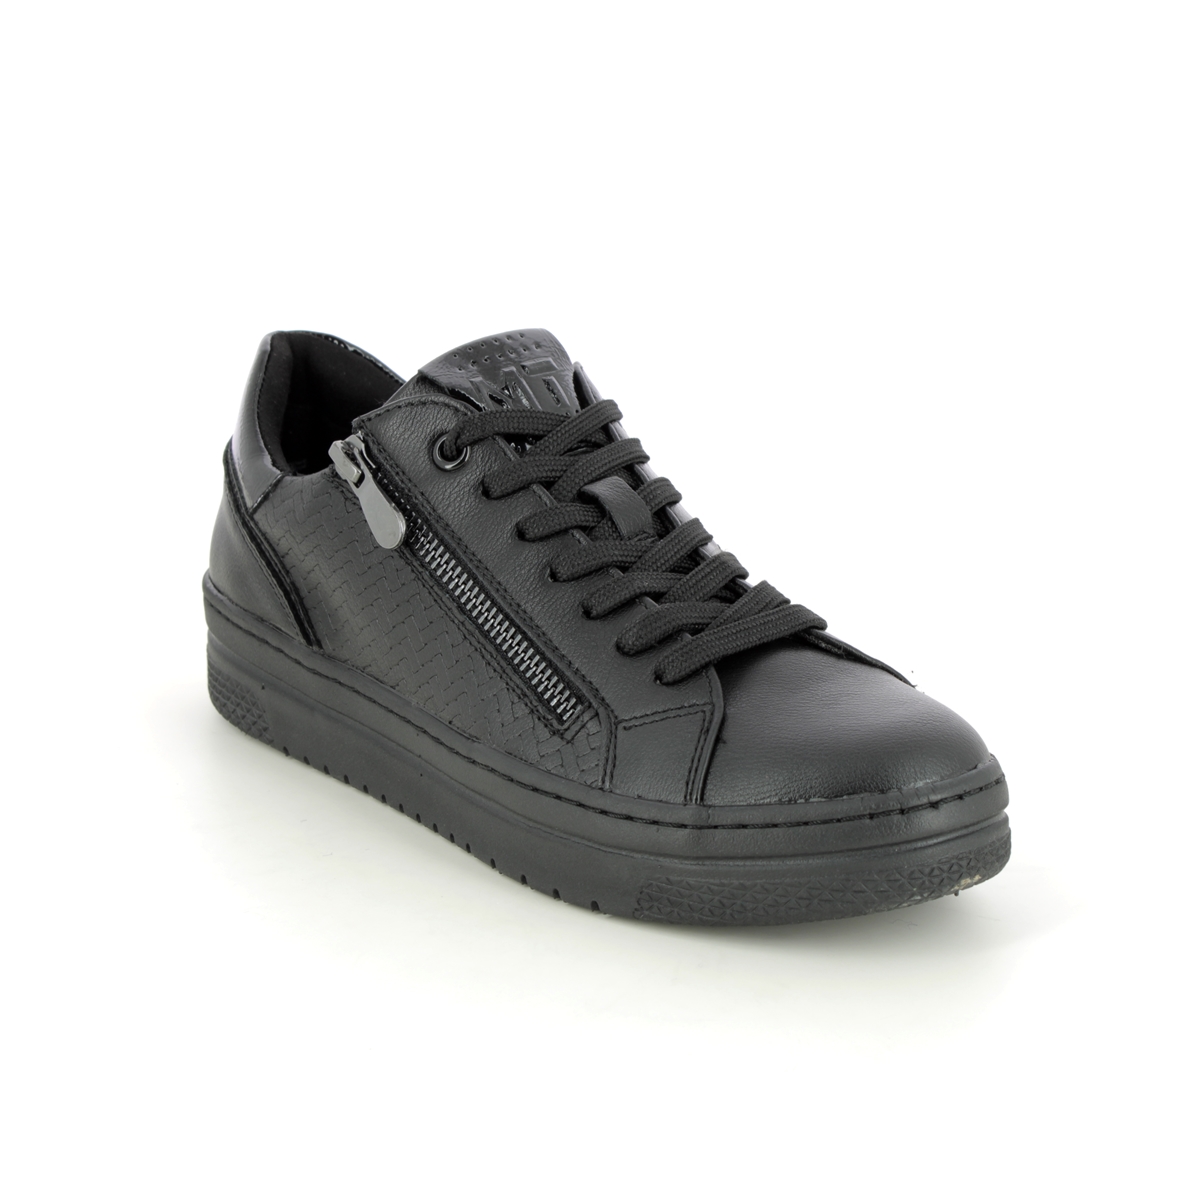 Marco Tozzi Raveen Black Womens Trainers 23709-29-098 In Size 39 In Plain Black